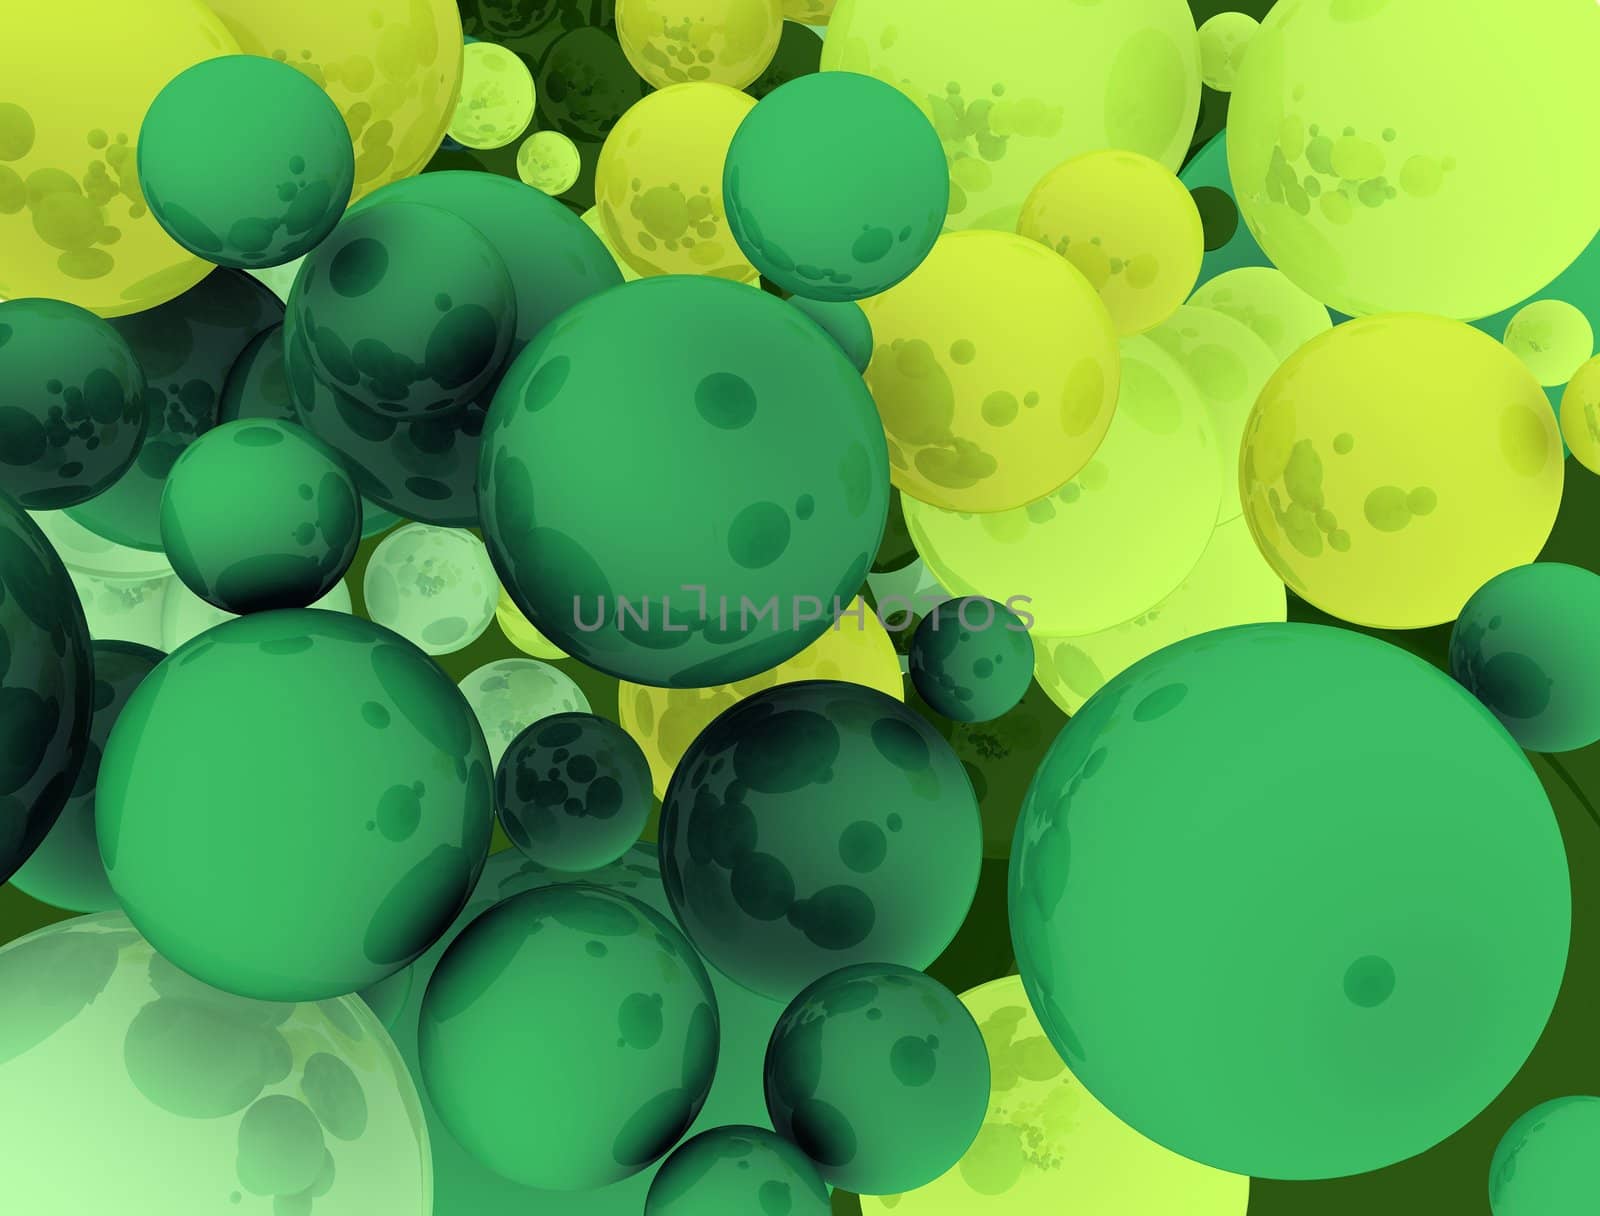 Green to yellow spherical background by jareso